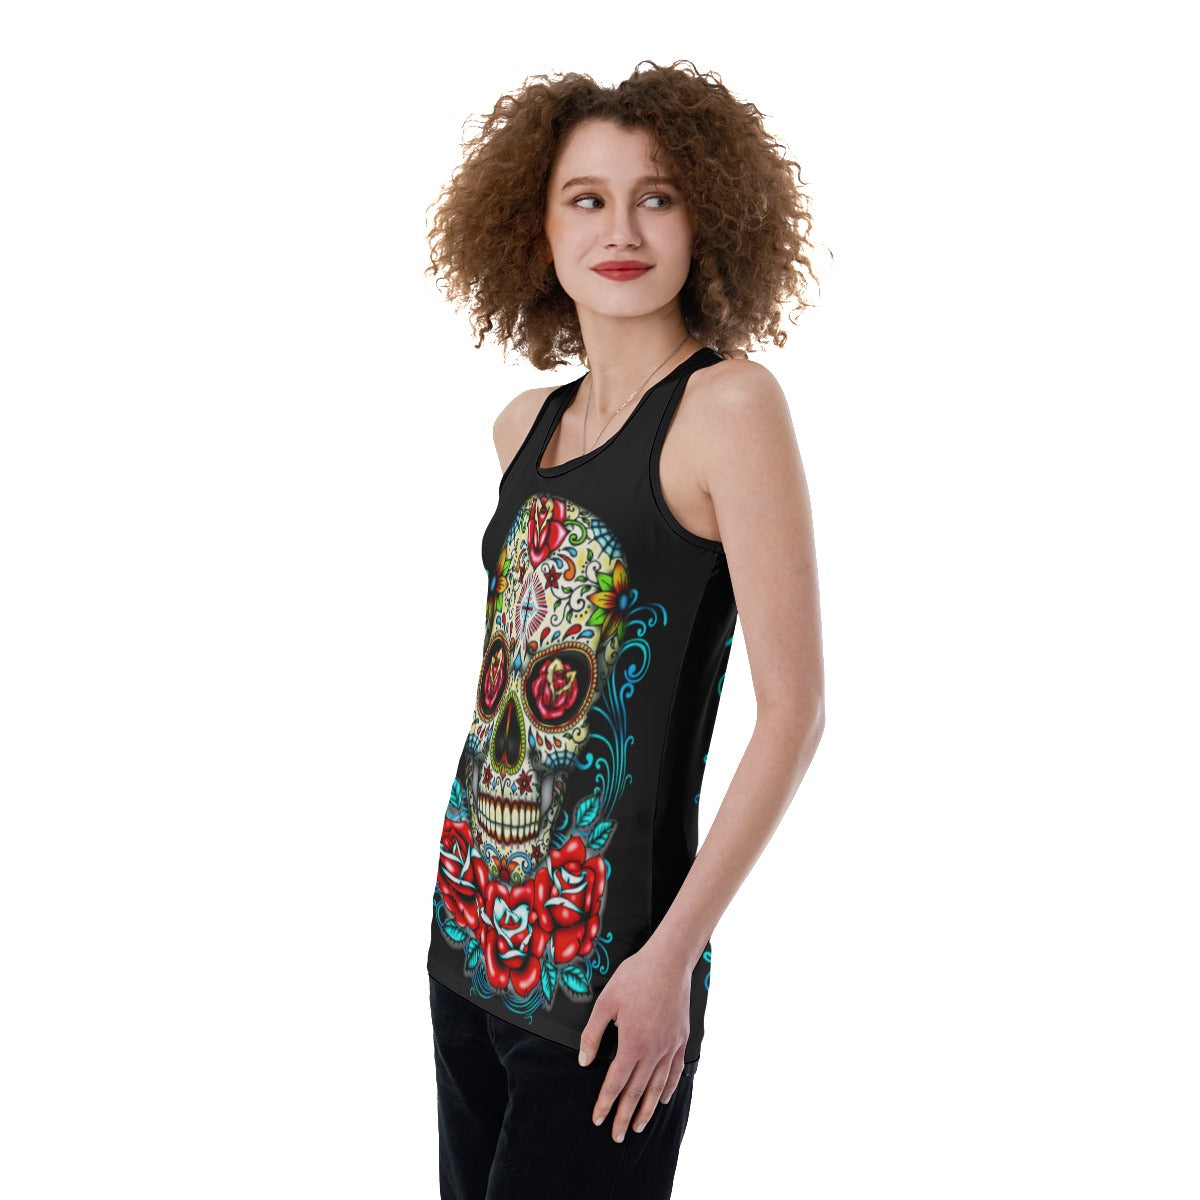 Floral sugar skull day of the dead Print Women's Back Hollow Tank Top